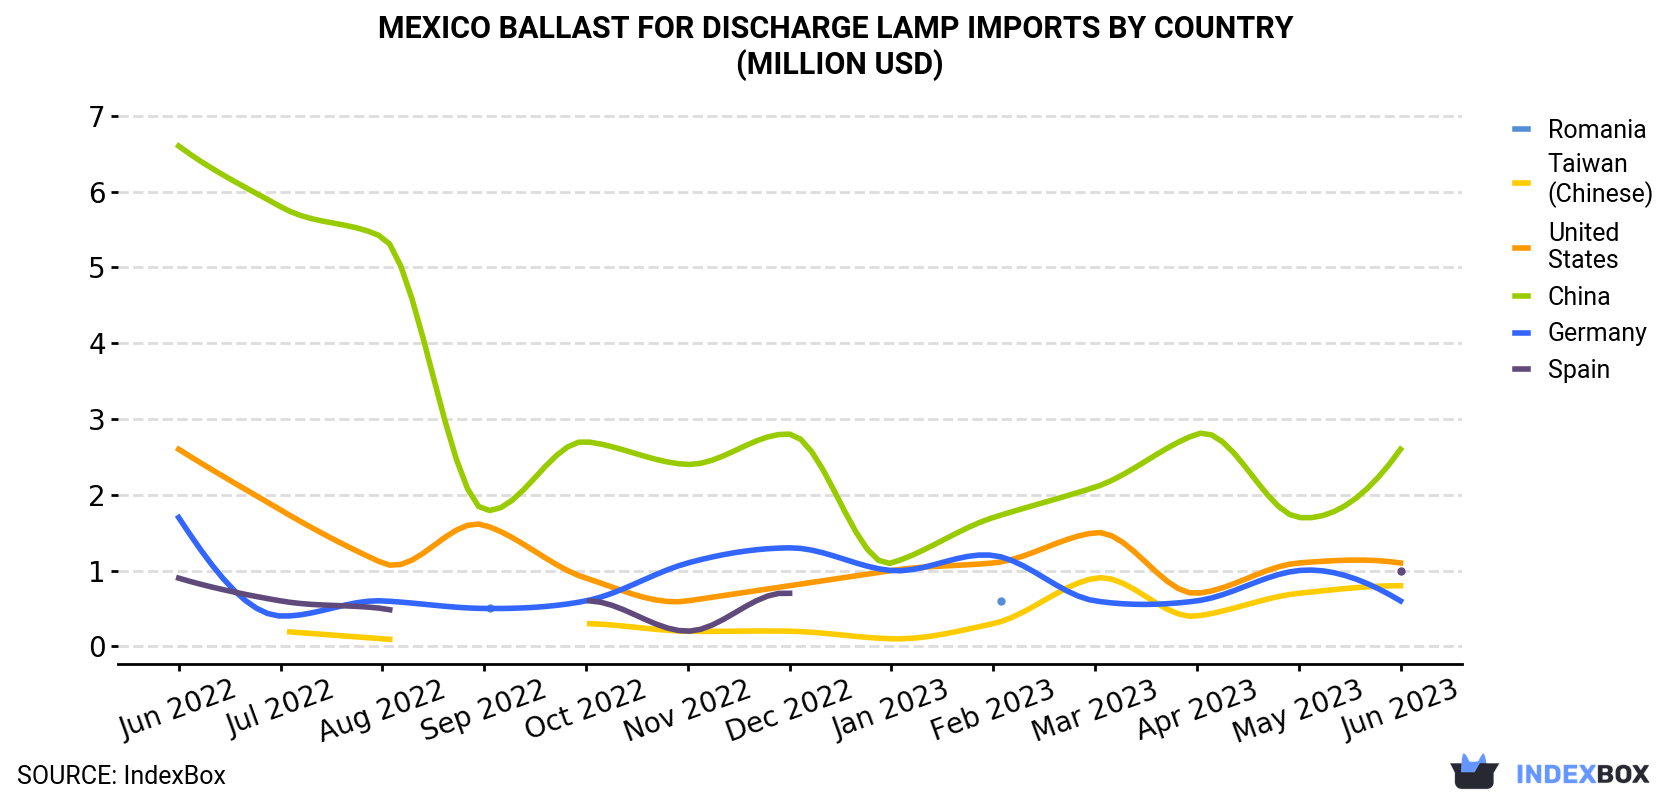 Mexico Ballast For Discharge Lamp Imports By Country (Million USD)